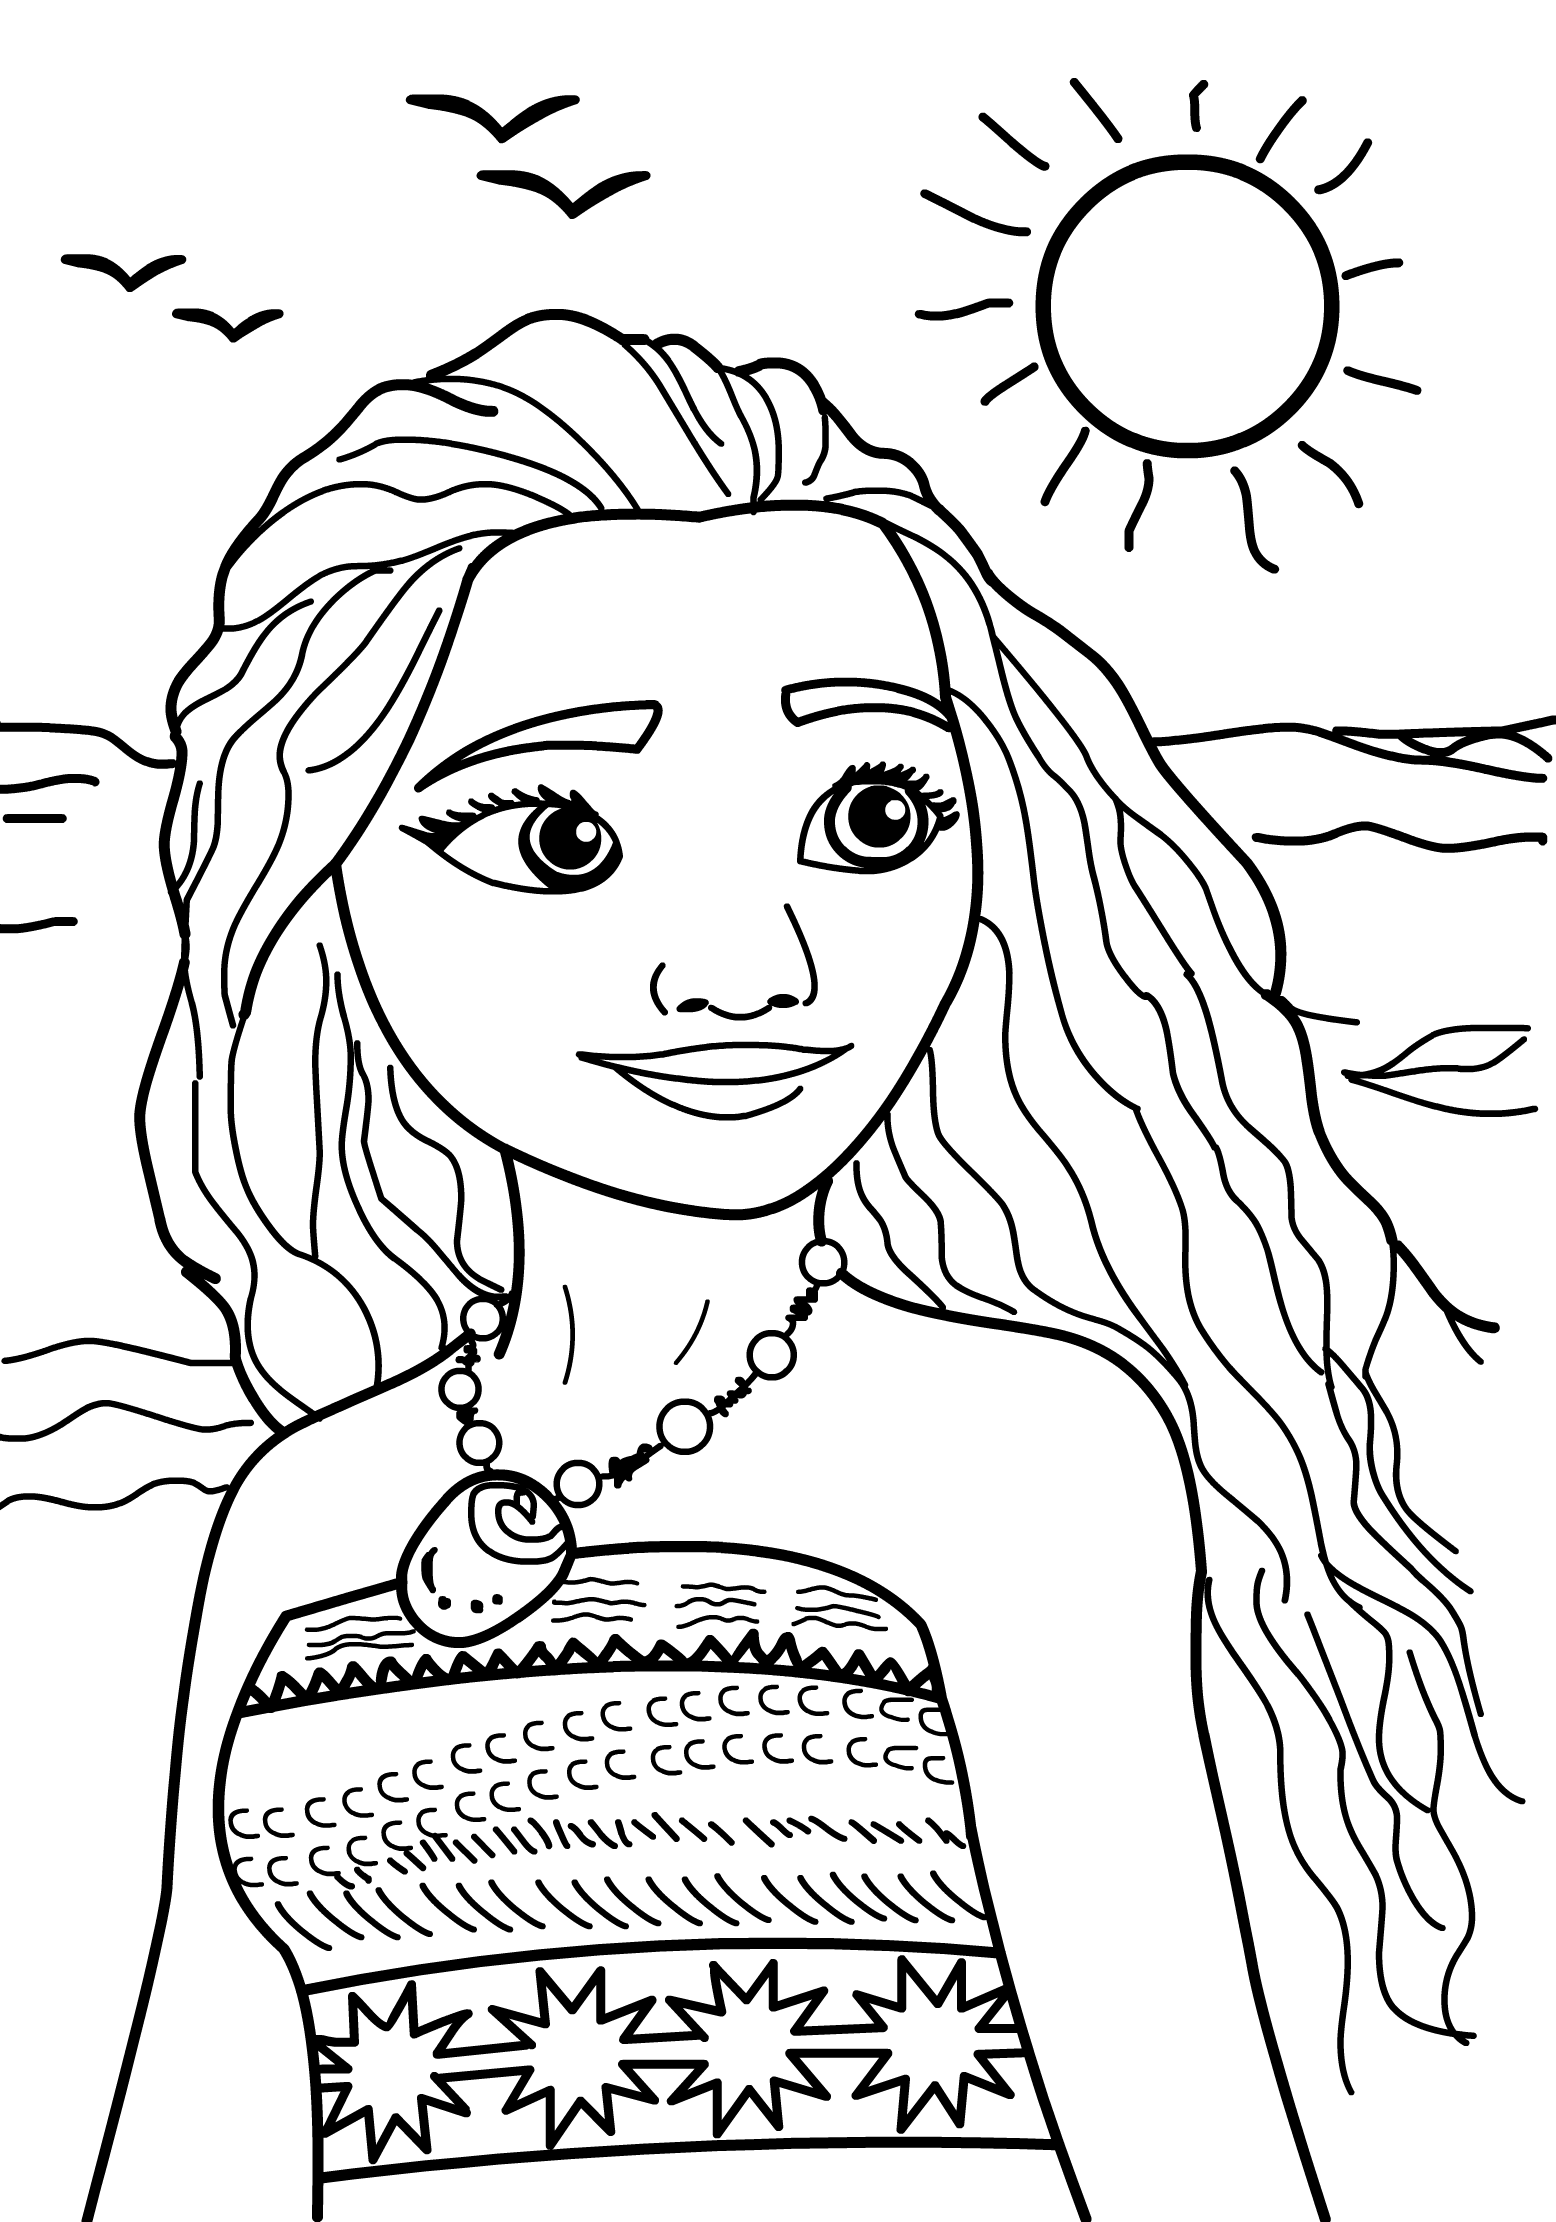 Disney Moana Printable Coloring Pages Disney Princess for Girls